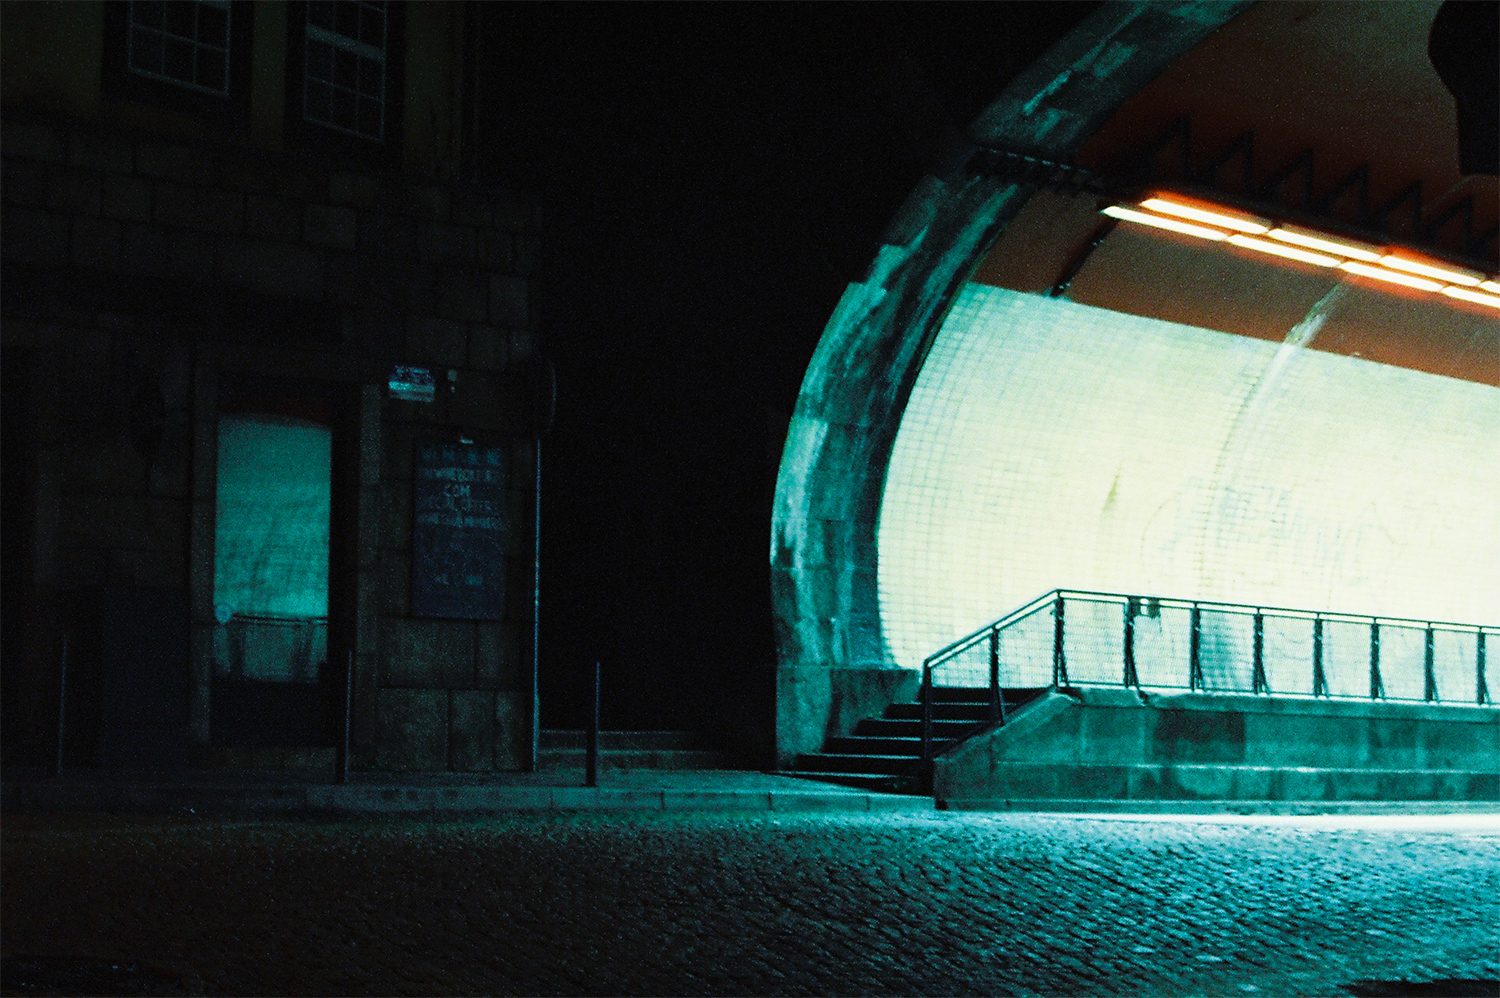 Analog photo of the entrance of a tunnel at night.